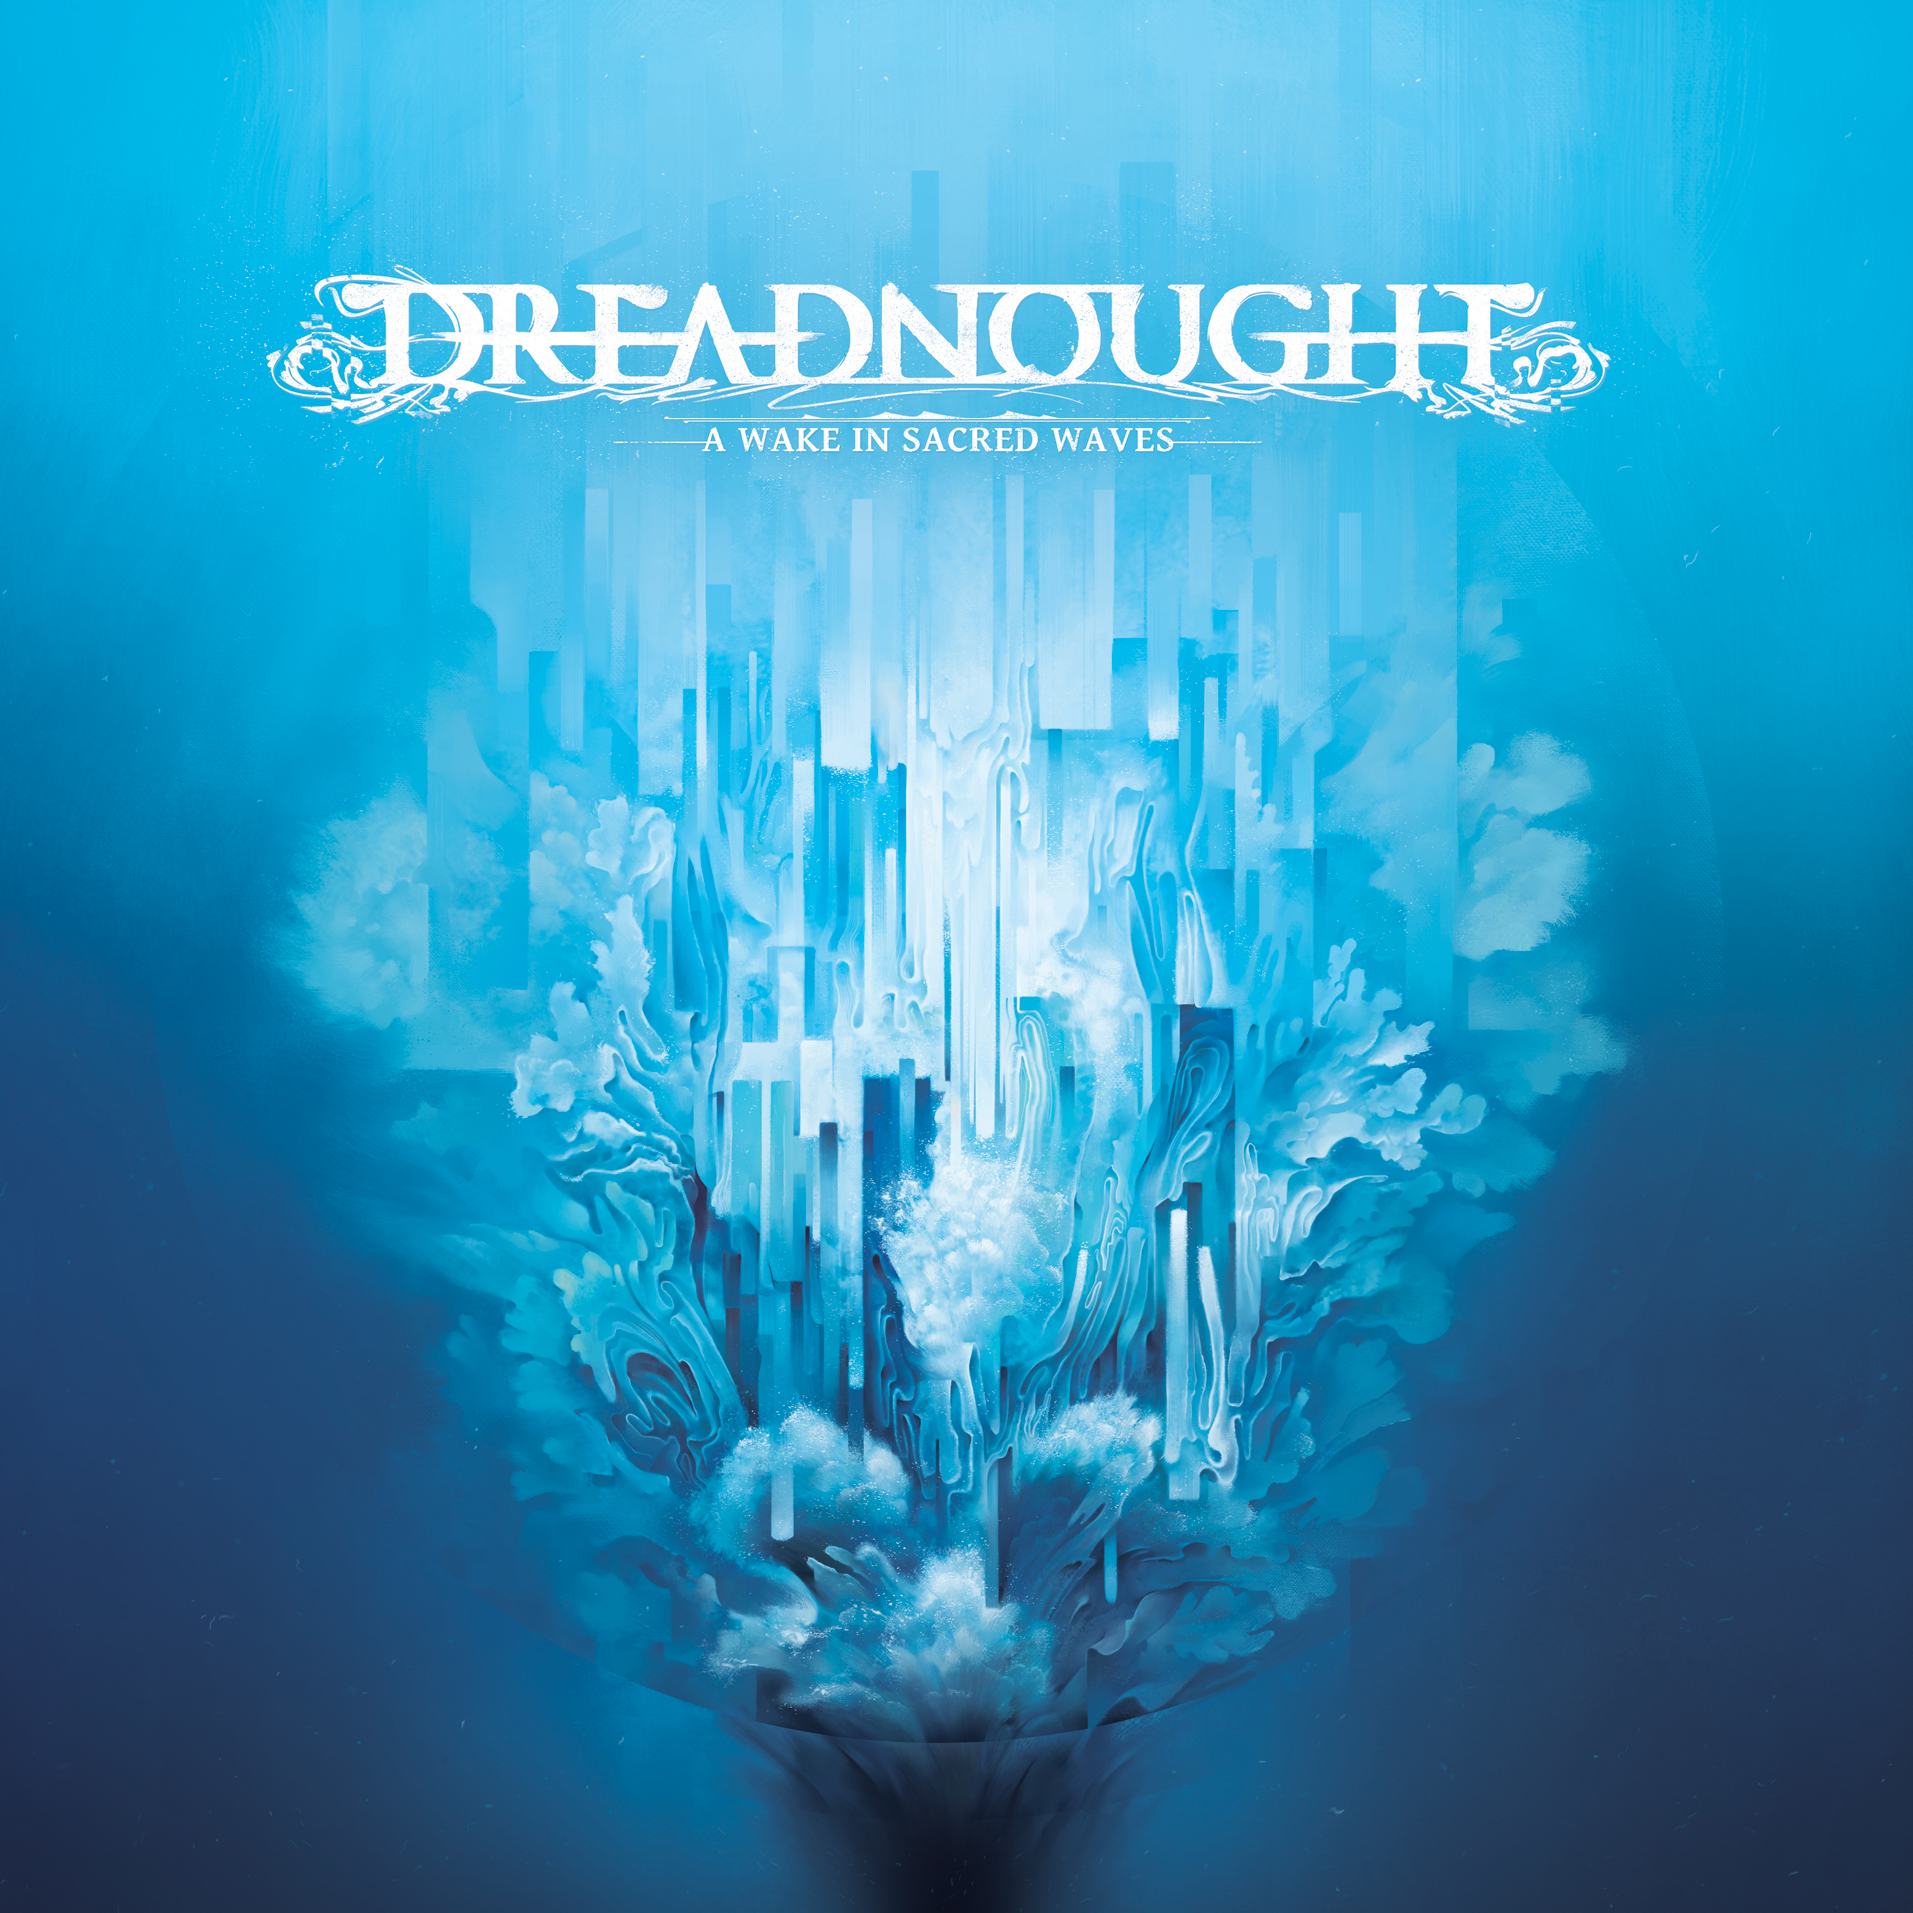 Dreadnought: A Wake in Sacred Waves